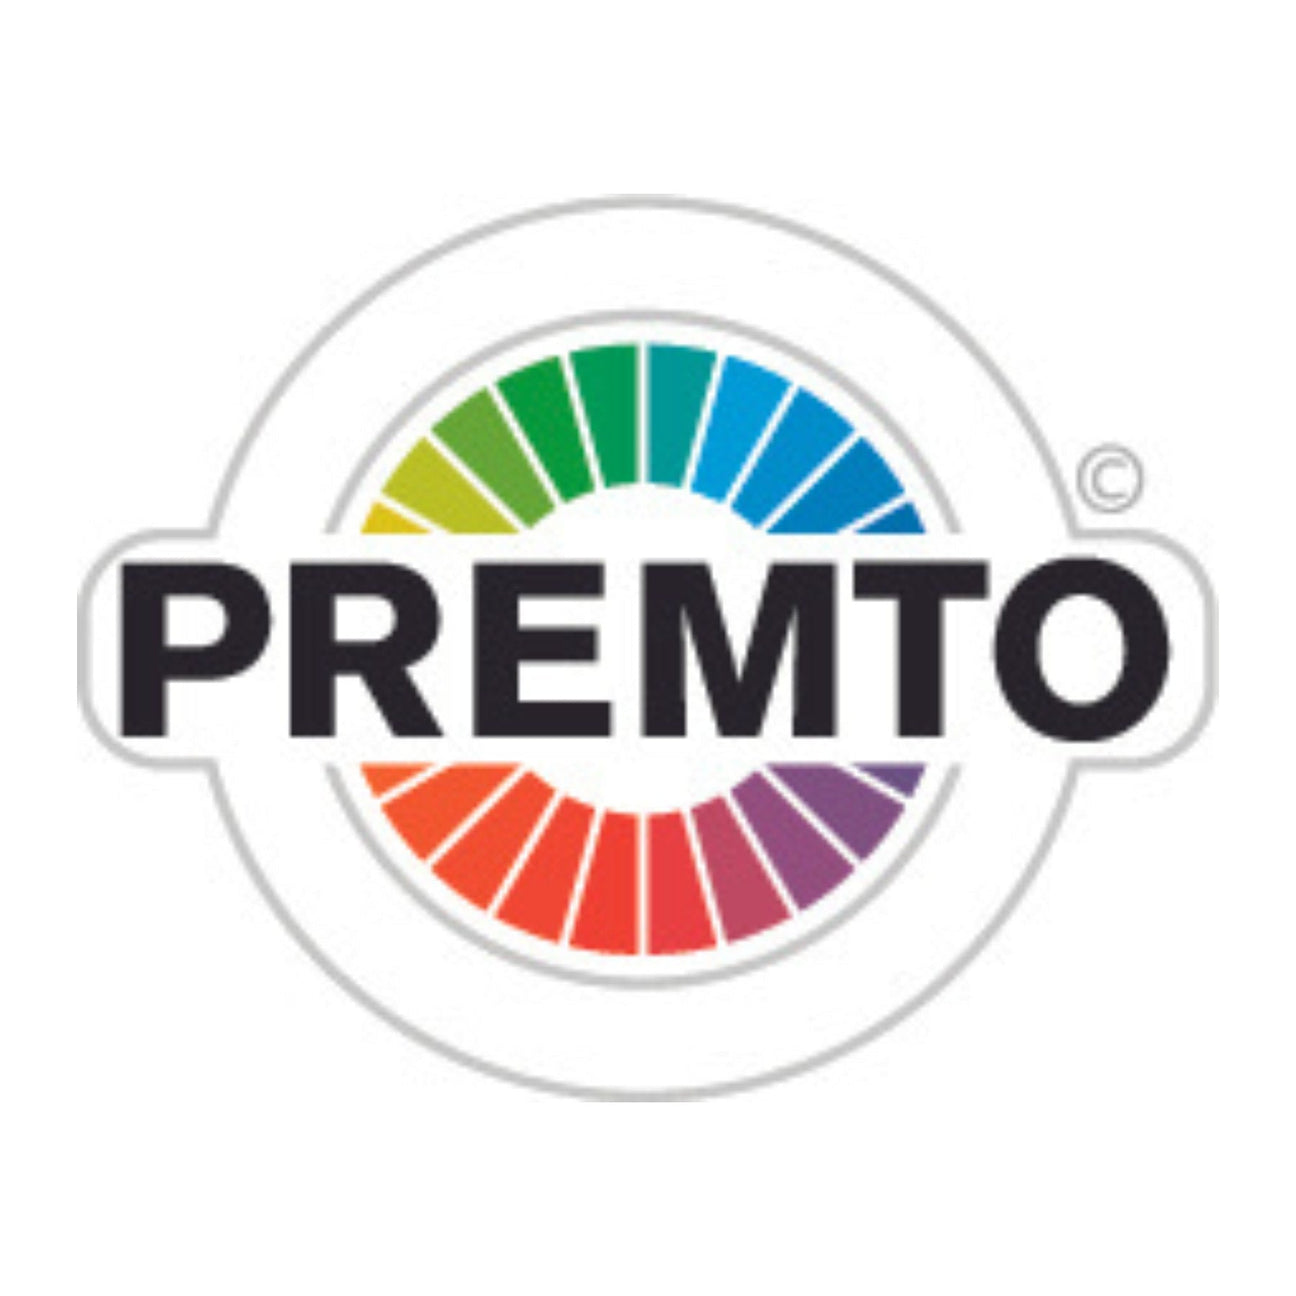 Where to buy Premto Stationery products